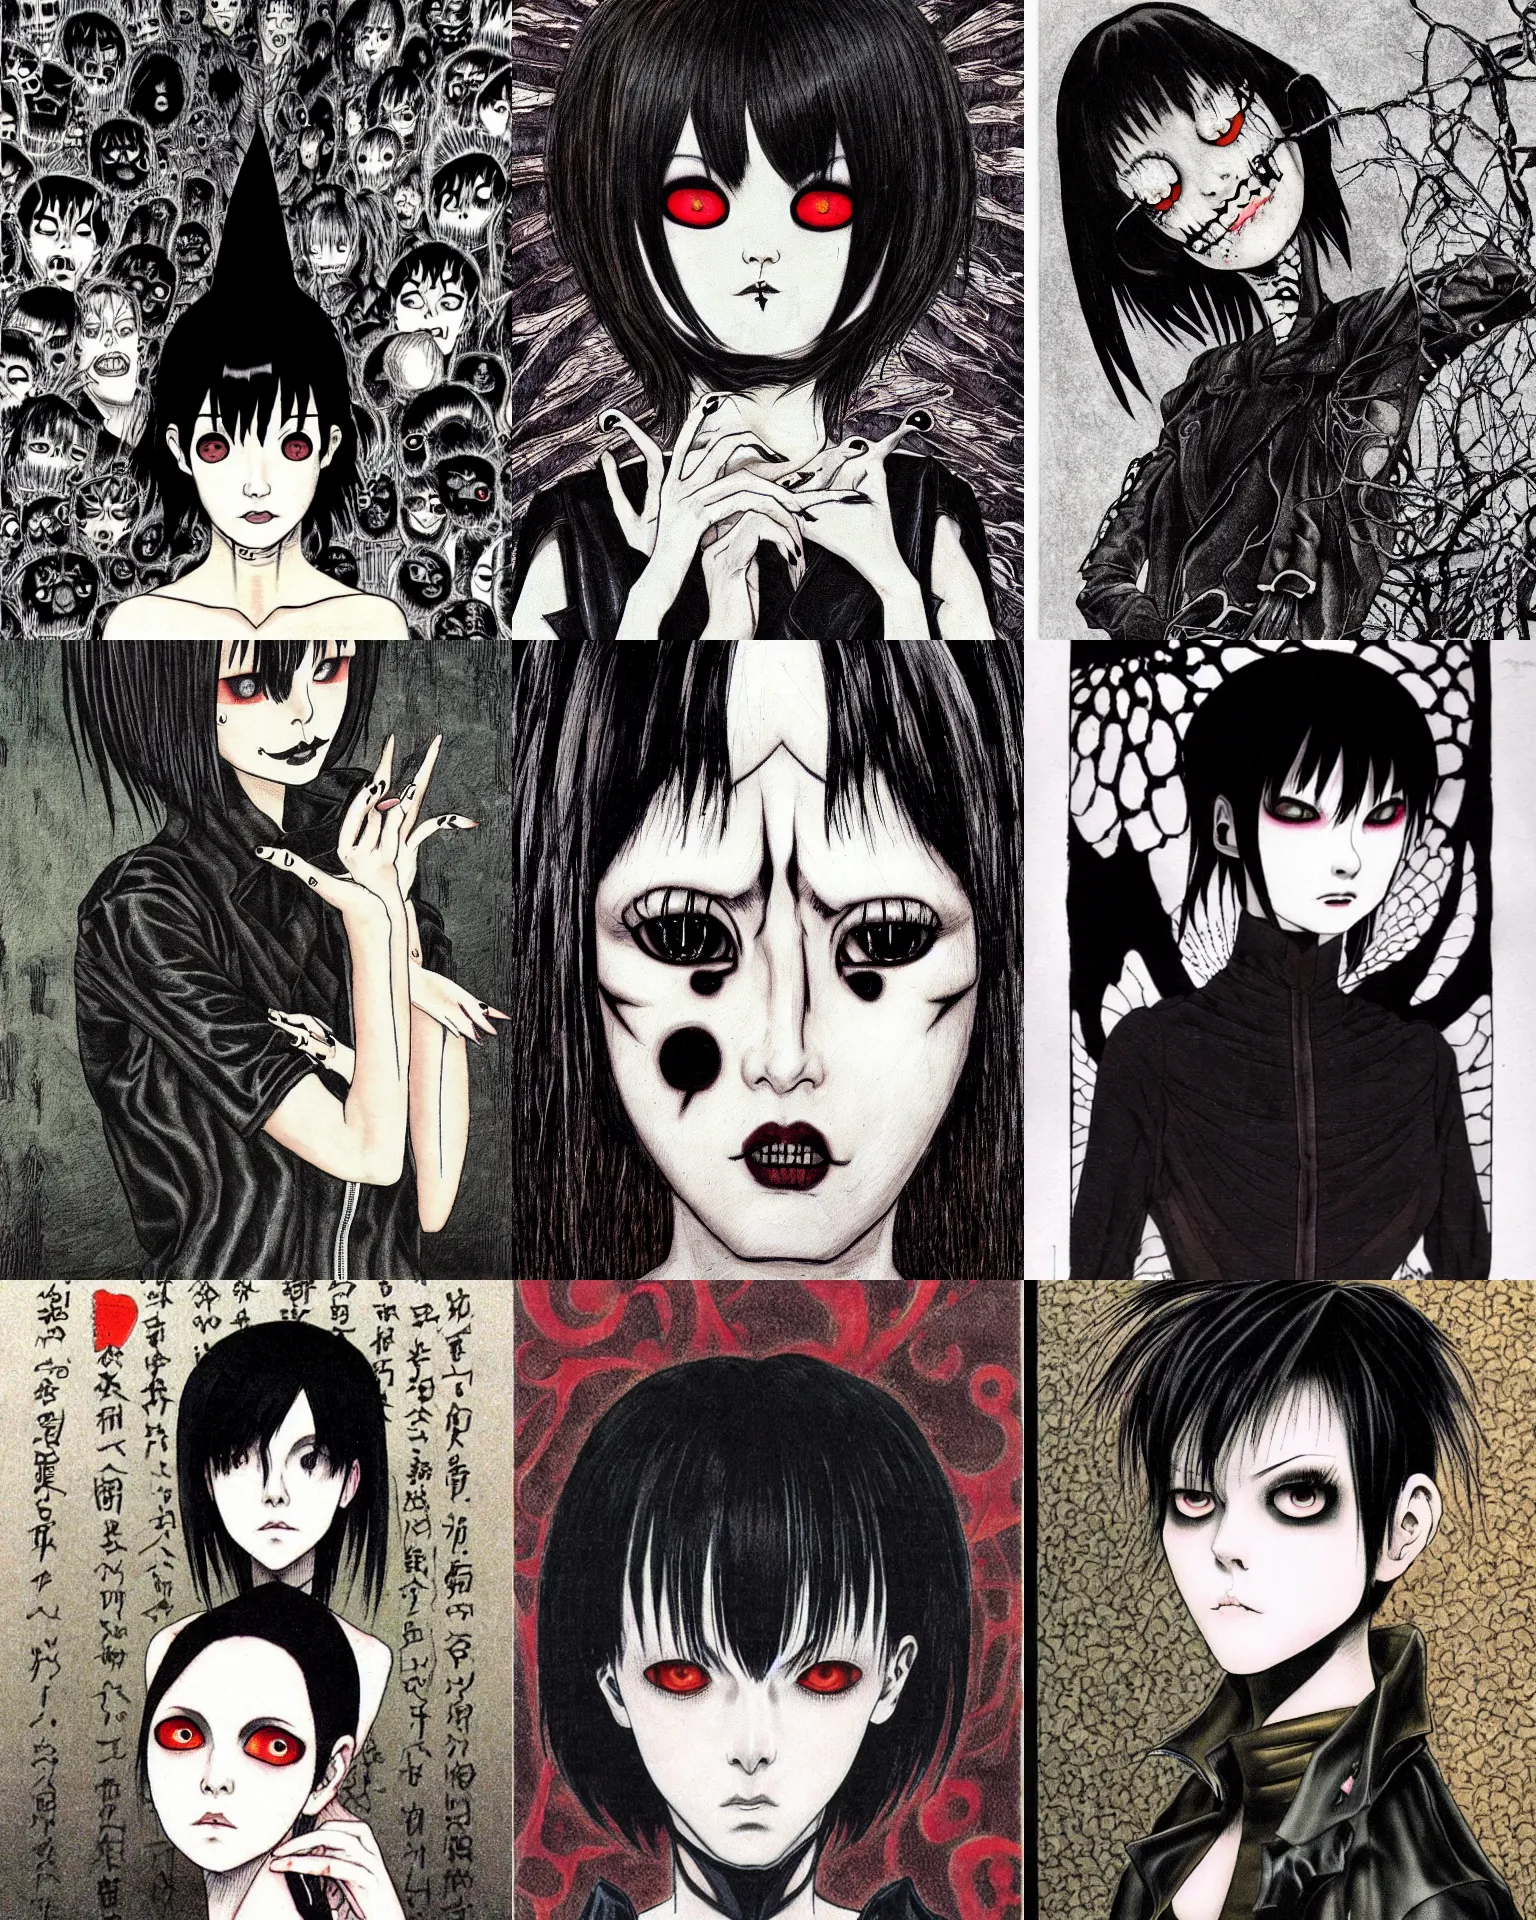 Prompt: A goth portrait by Junji Ito. She has large evil eyes with entirely-black sclerae!!!!!! Her hair is dark brown and cut into a short, messy pixie cut. She has a slightly rounded face, with a pointed chin, and a small nose. She is wearing a black leather jacket, a black knee-length skirt, a black choker, and black leather boots.